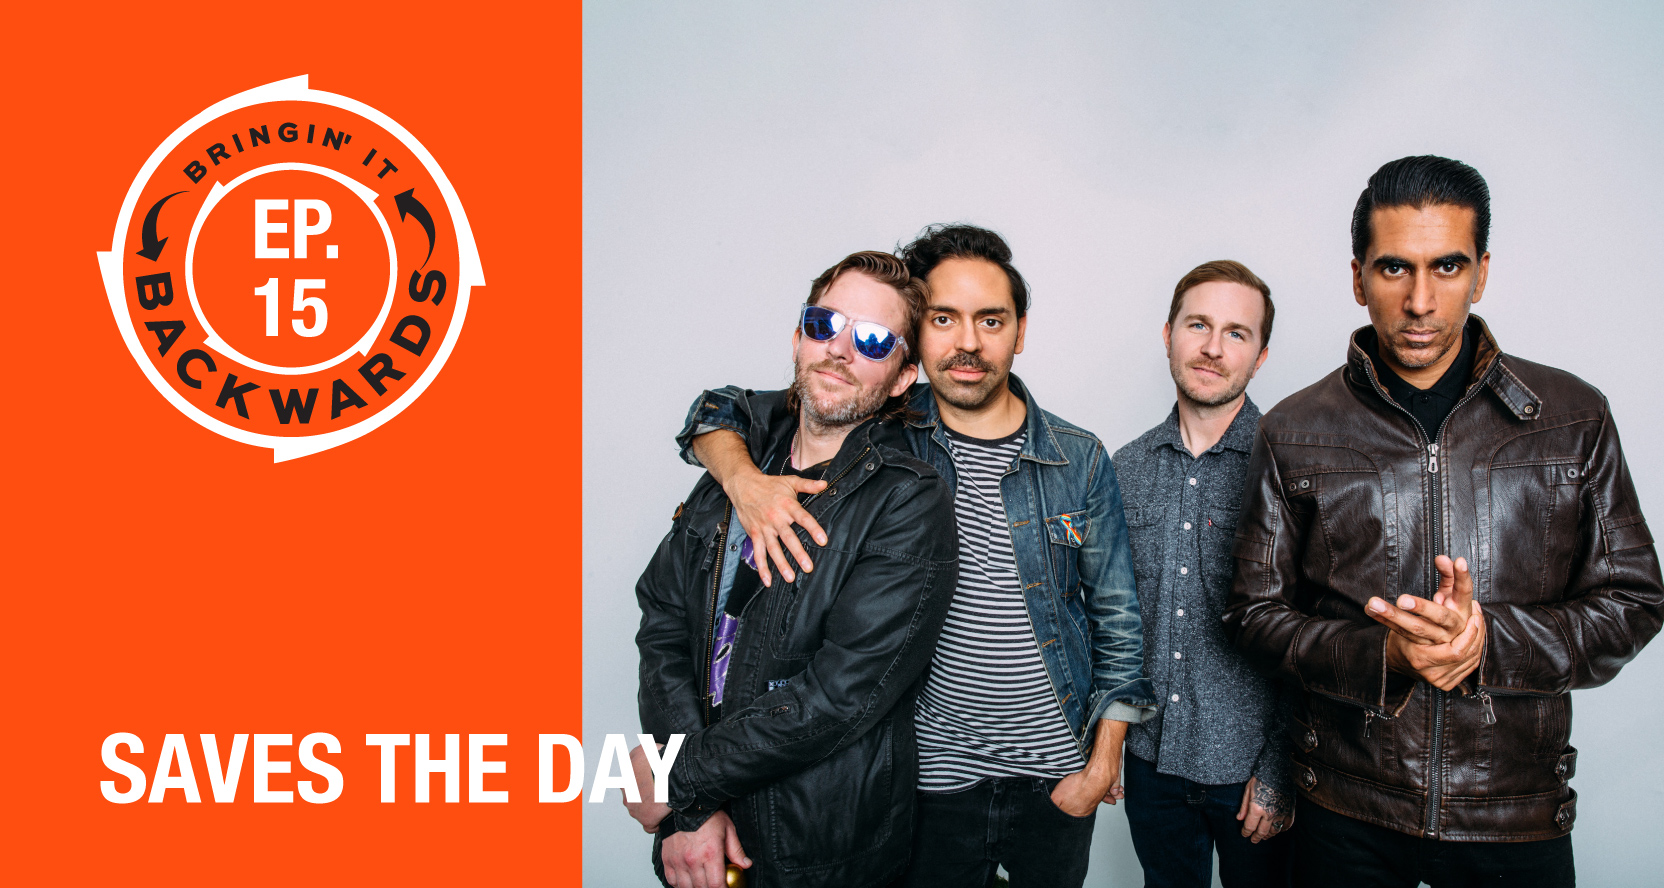 Bringin’ it Backwards: Interview with Saves the Day